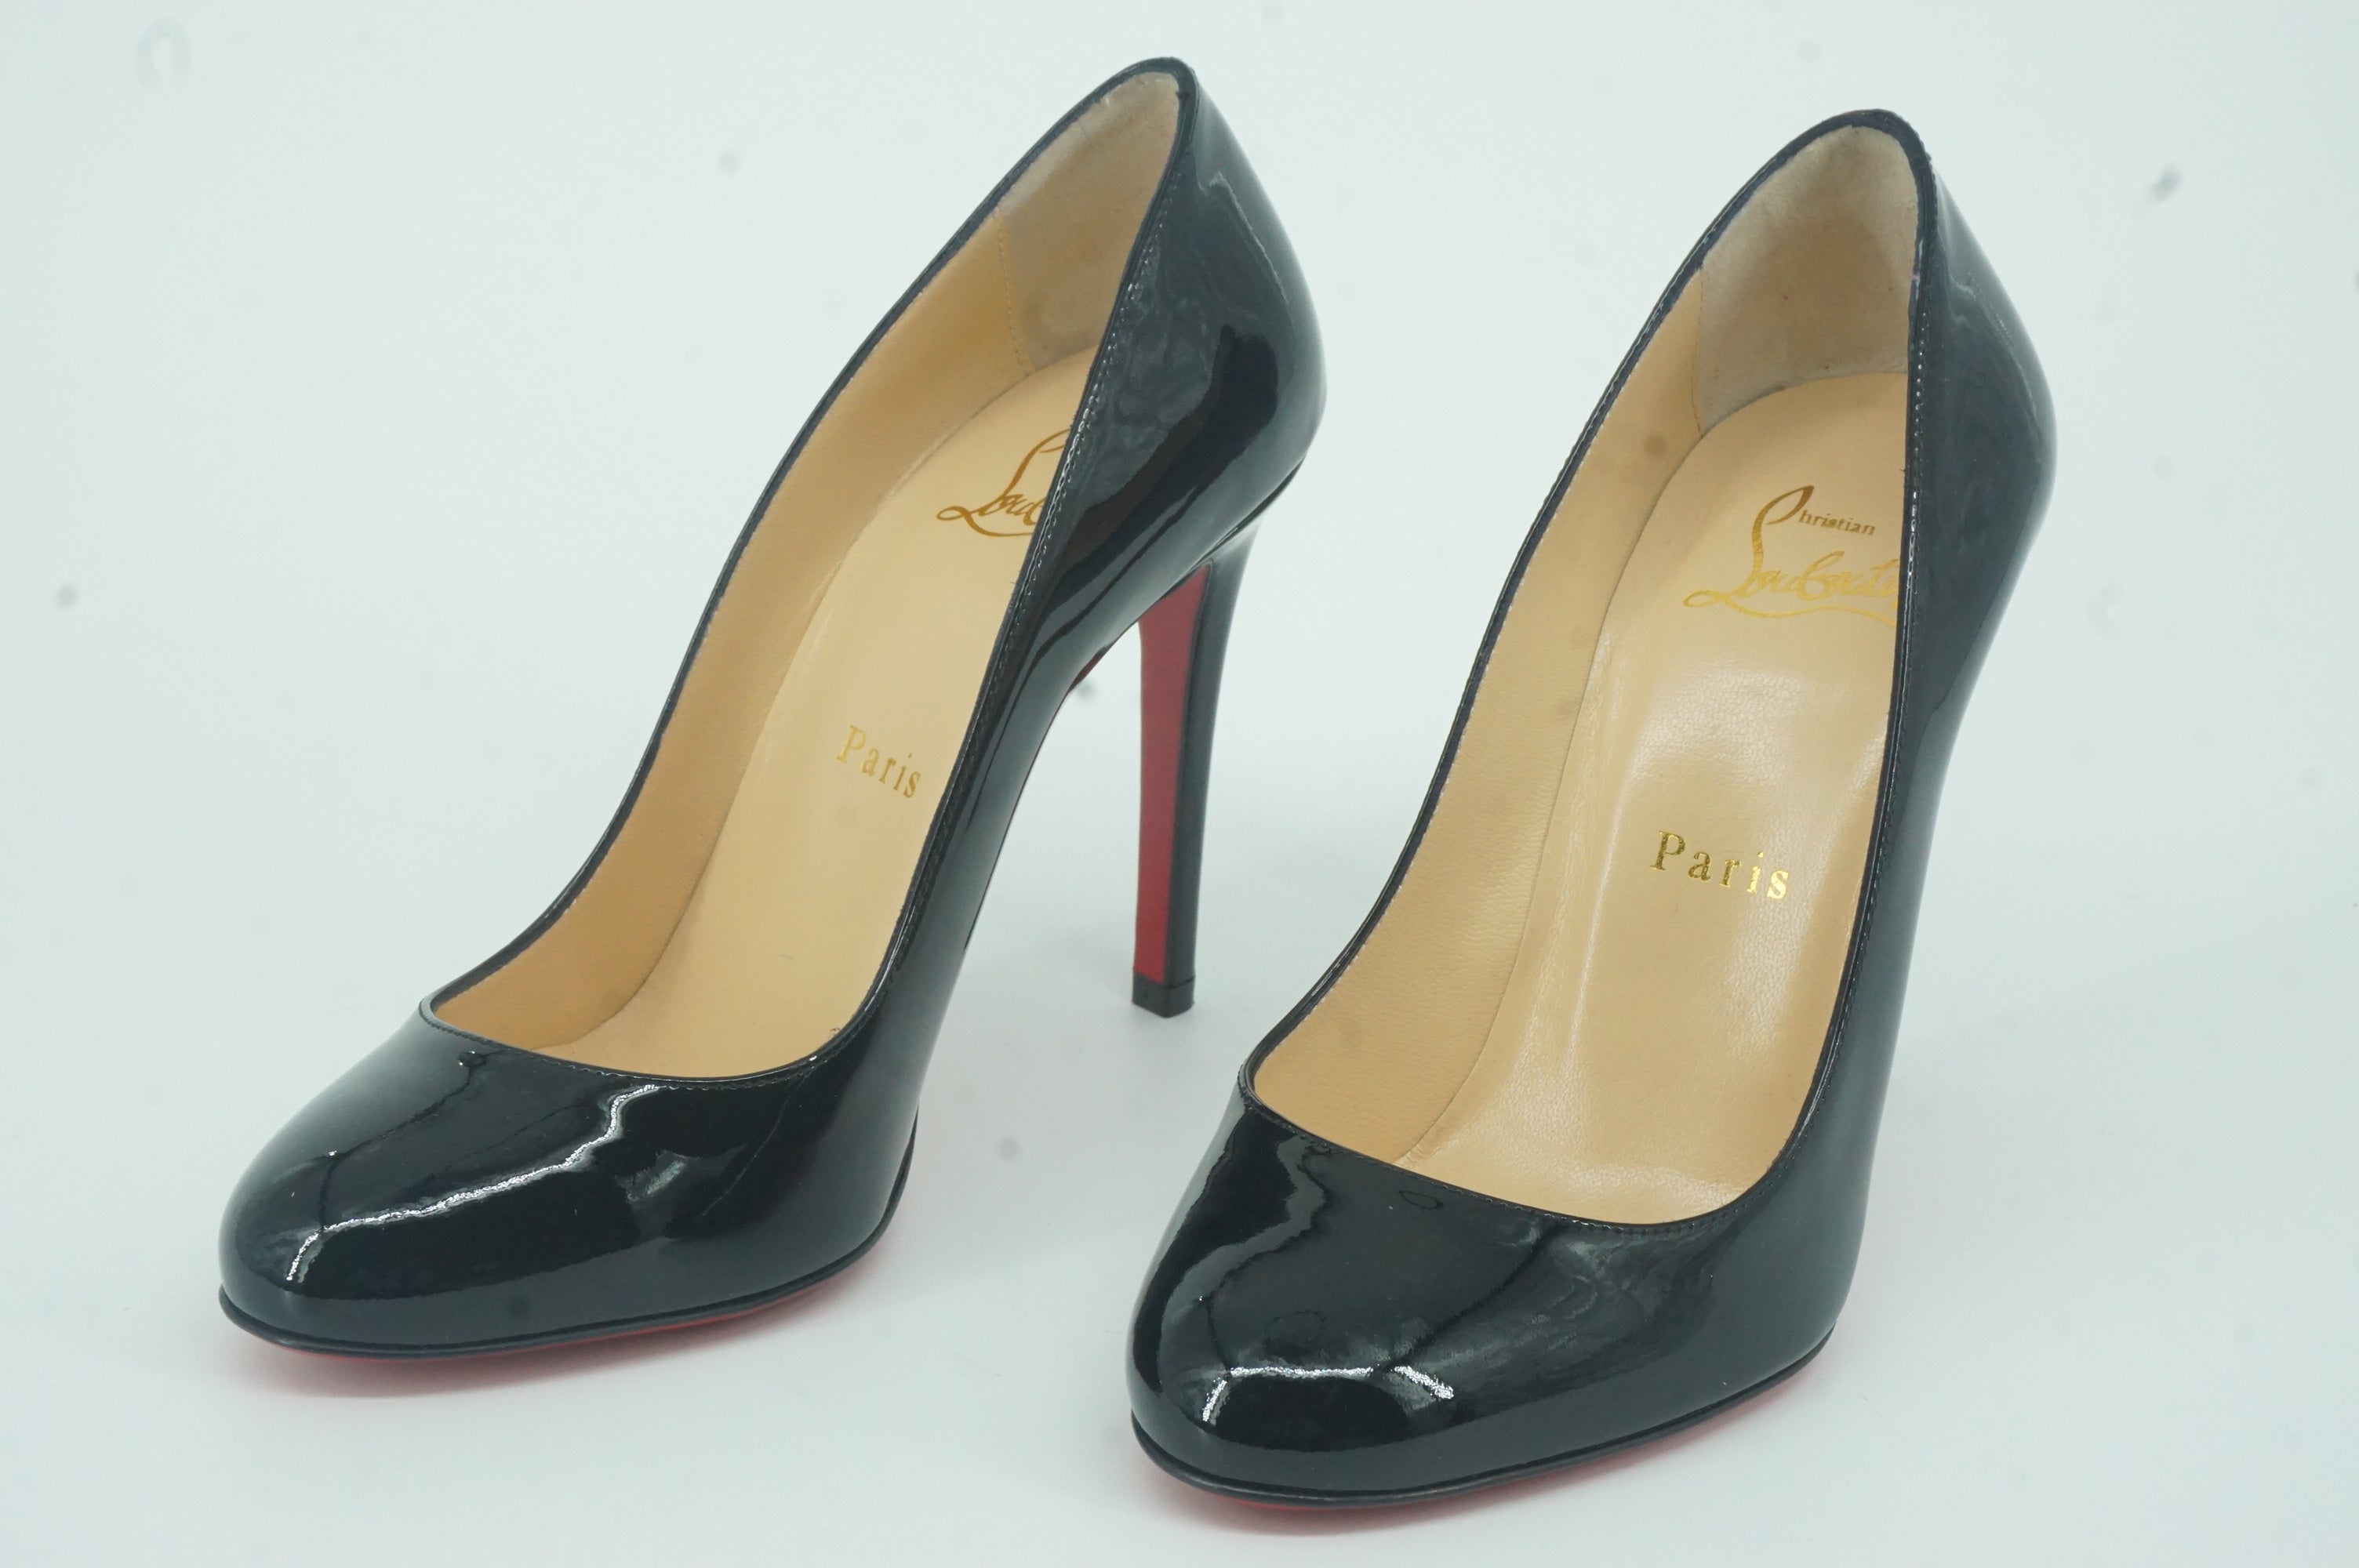 Christian Louboutin Fifille Black Patent Leather Pumps SZ 36.5 Round Toe $695